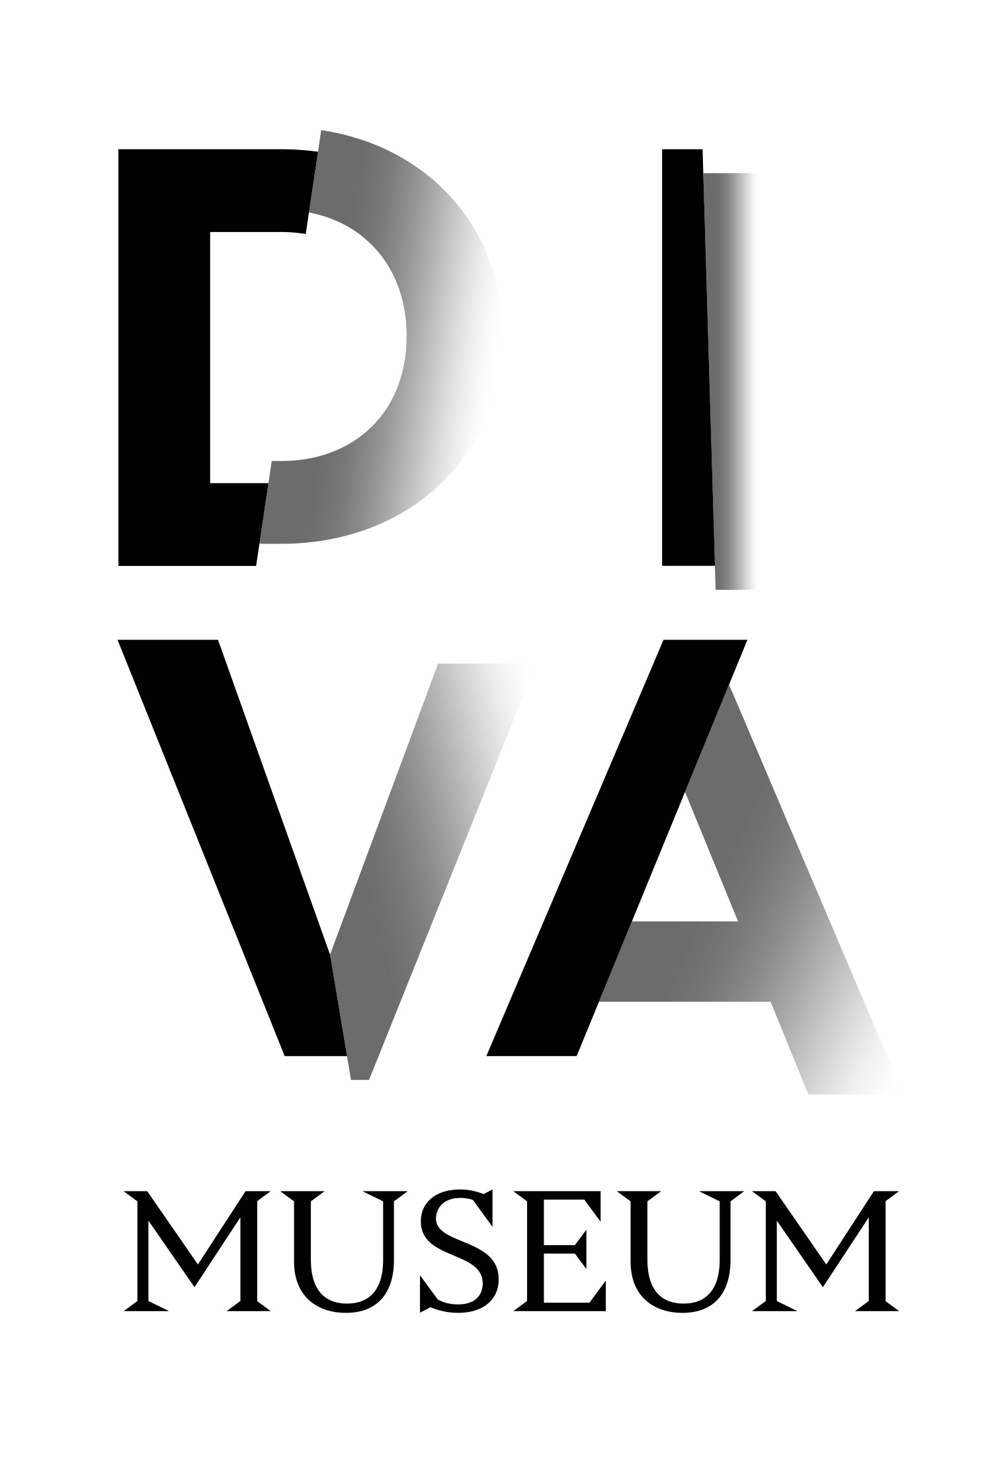 DIVA, museum for diamonds, jewellery and silver